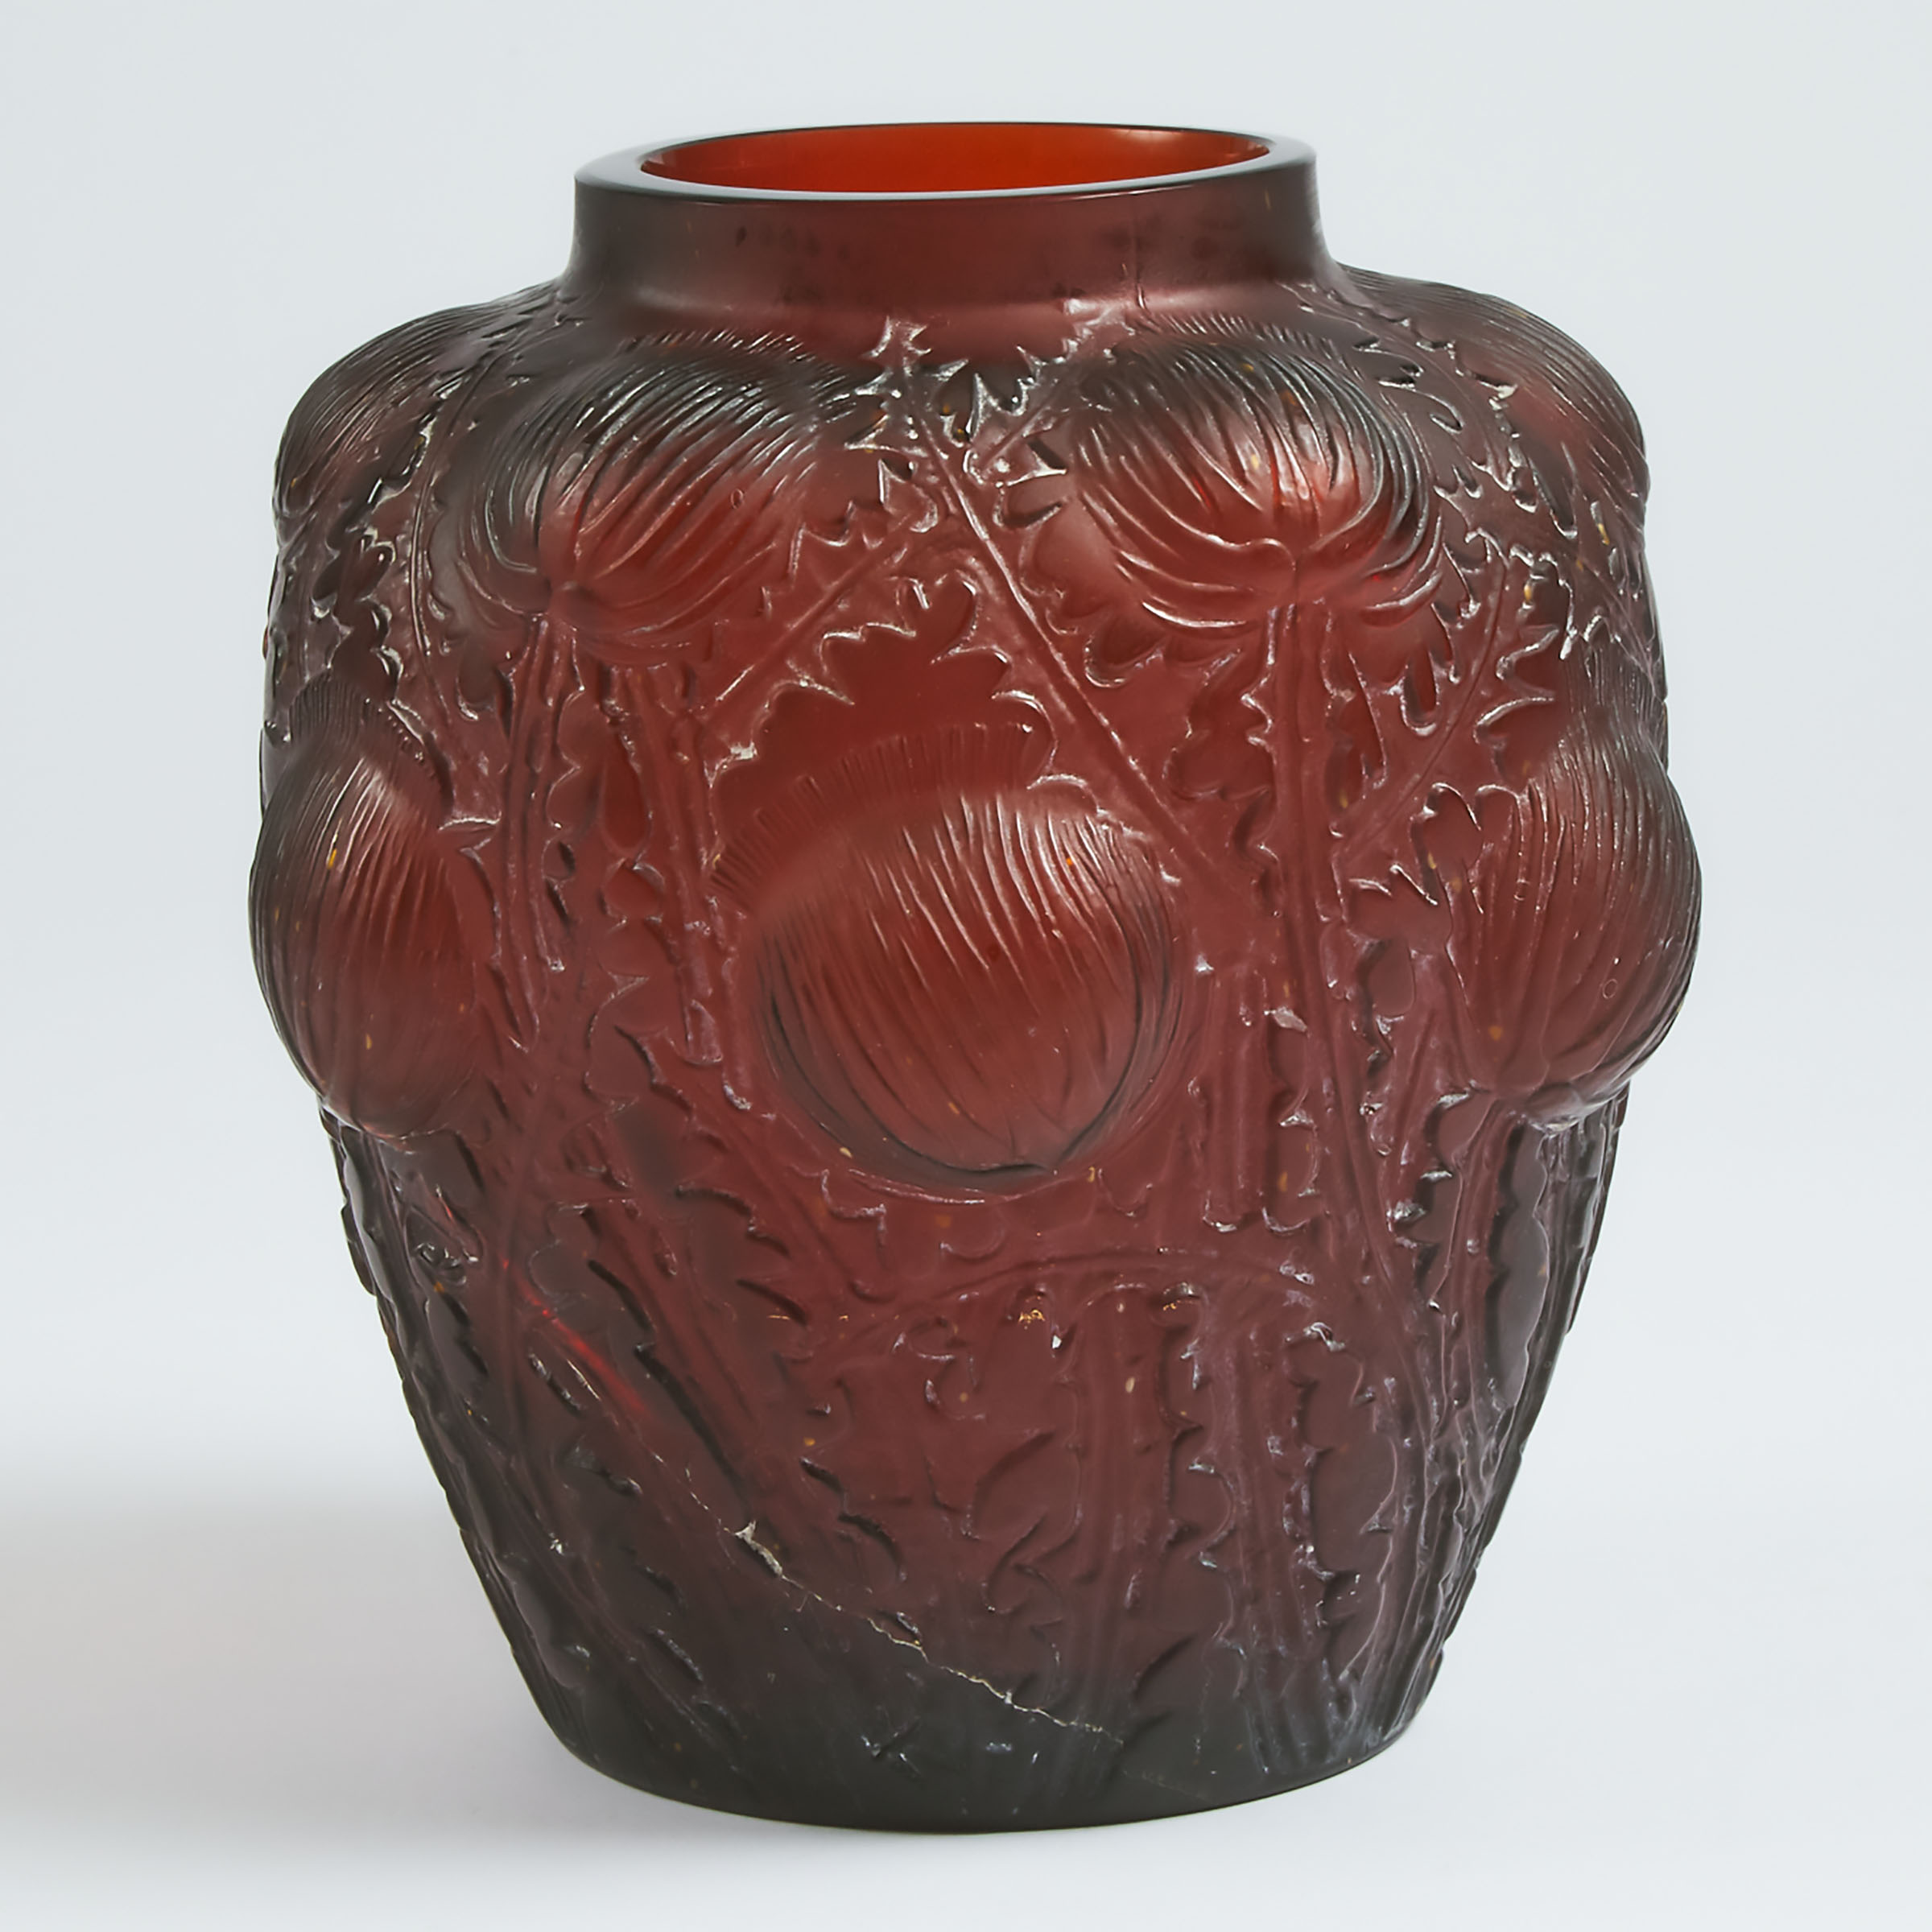 'Domrémy', Lalique Amber Moulded and Frosted Glass Vase, c.1930